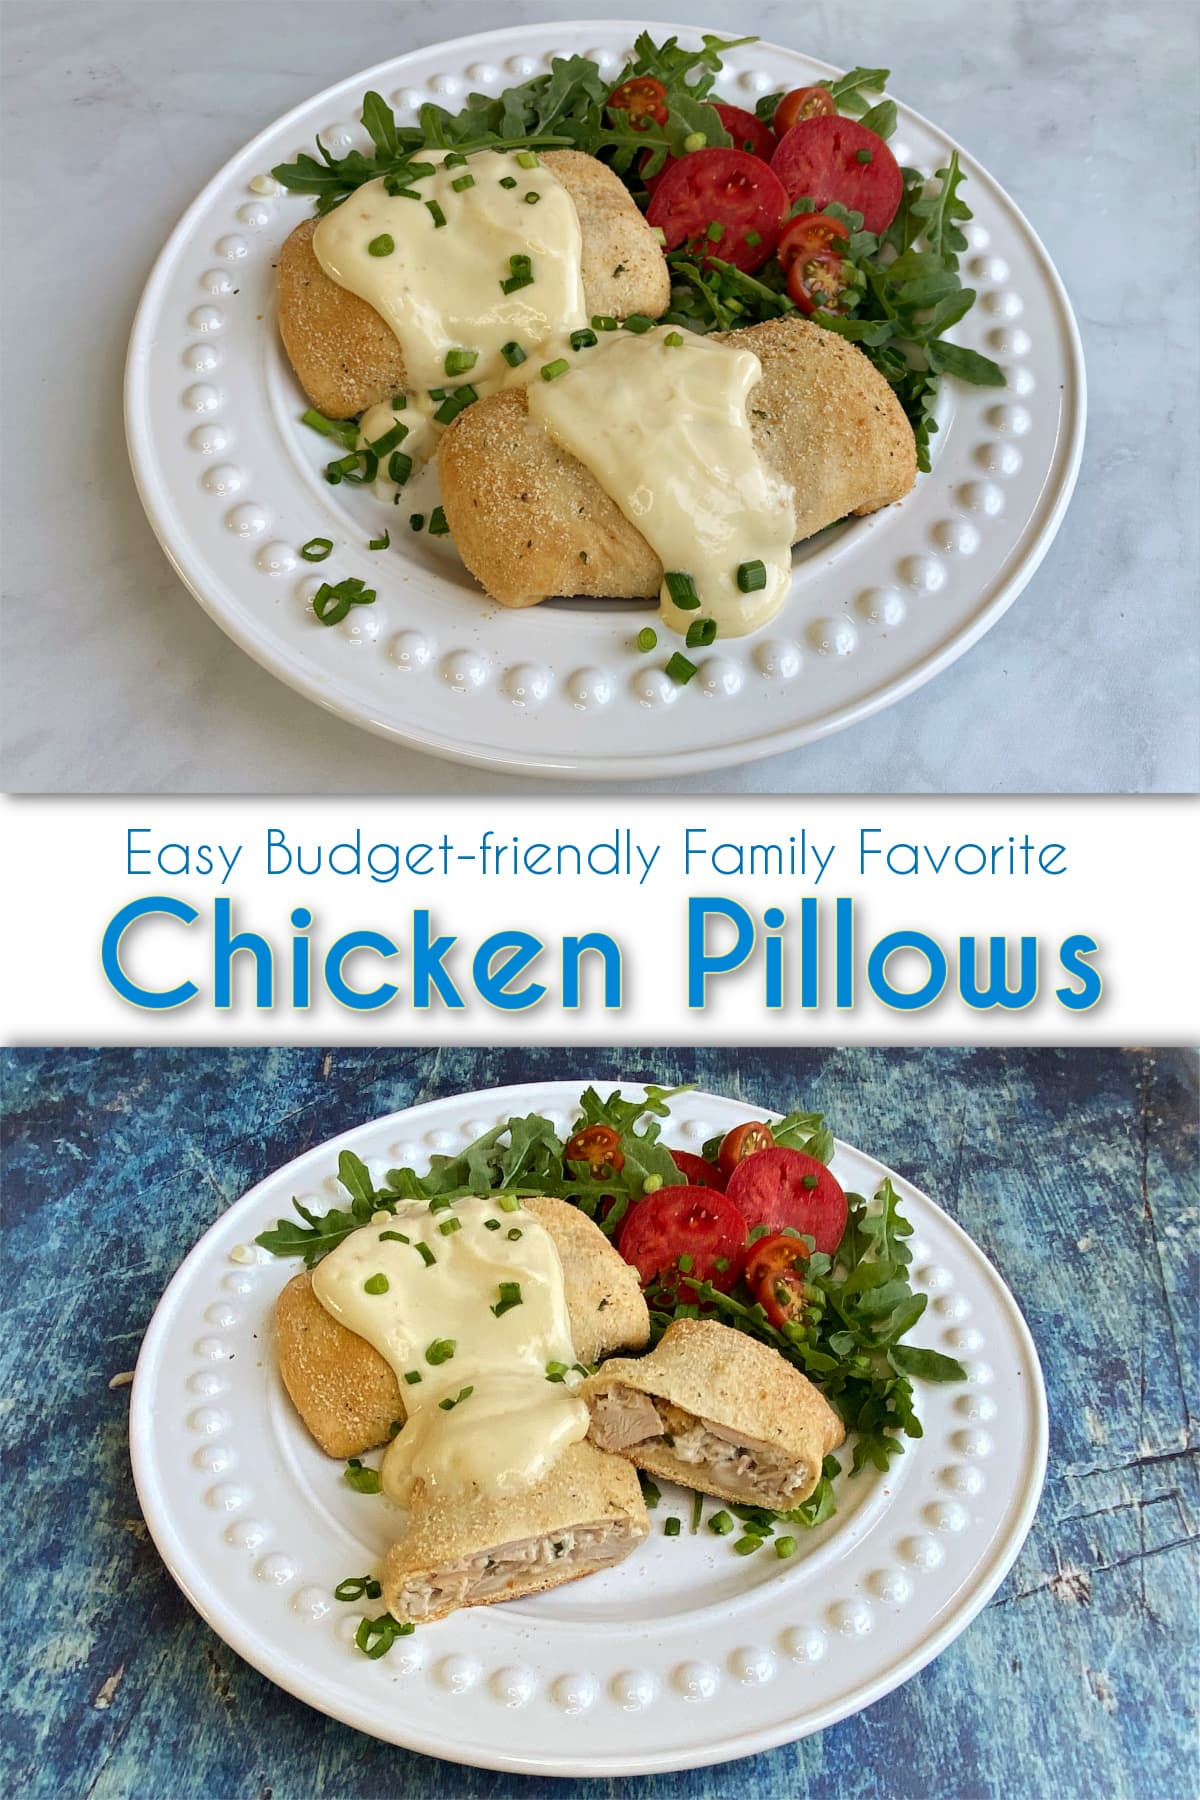 Two chicken pillows on a plate, uncut, with gravy on top. Arugula and tomato slices are on the side. Pin text reads: Easy Budget-friendly Family Favorite | Chicken Pillows